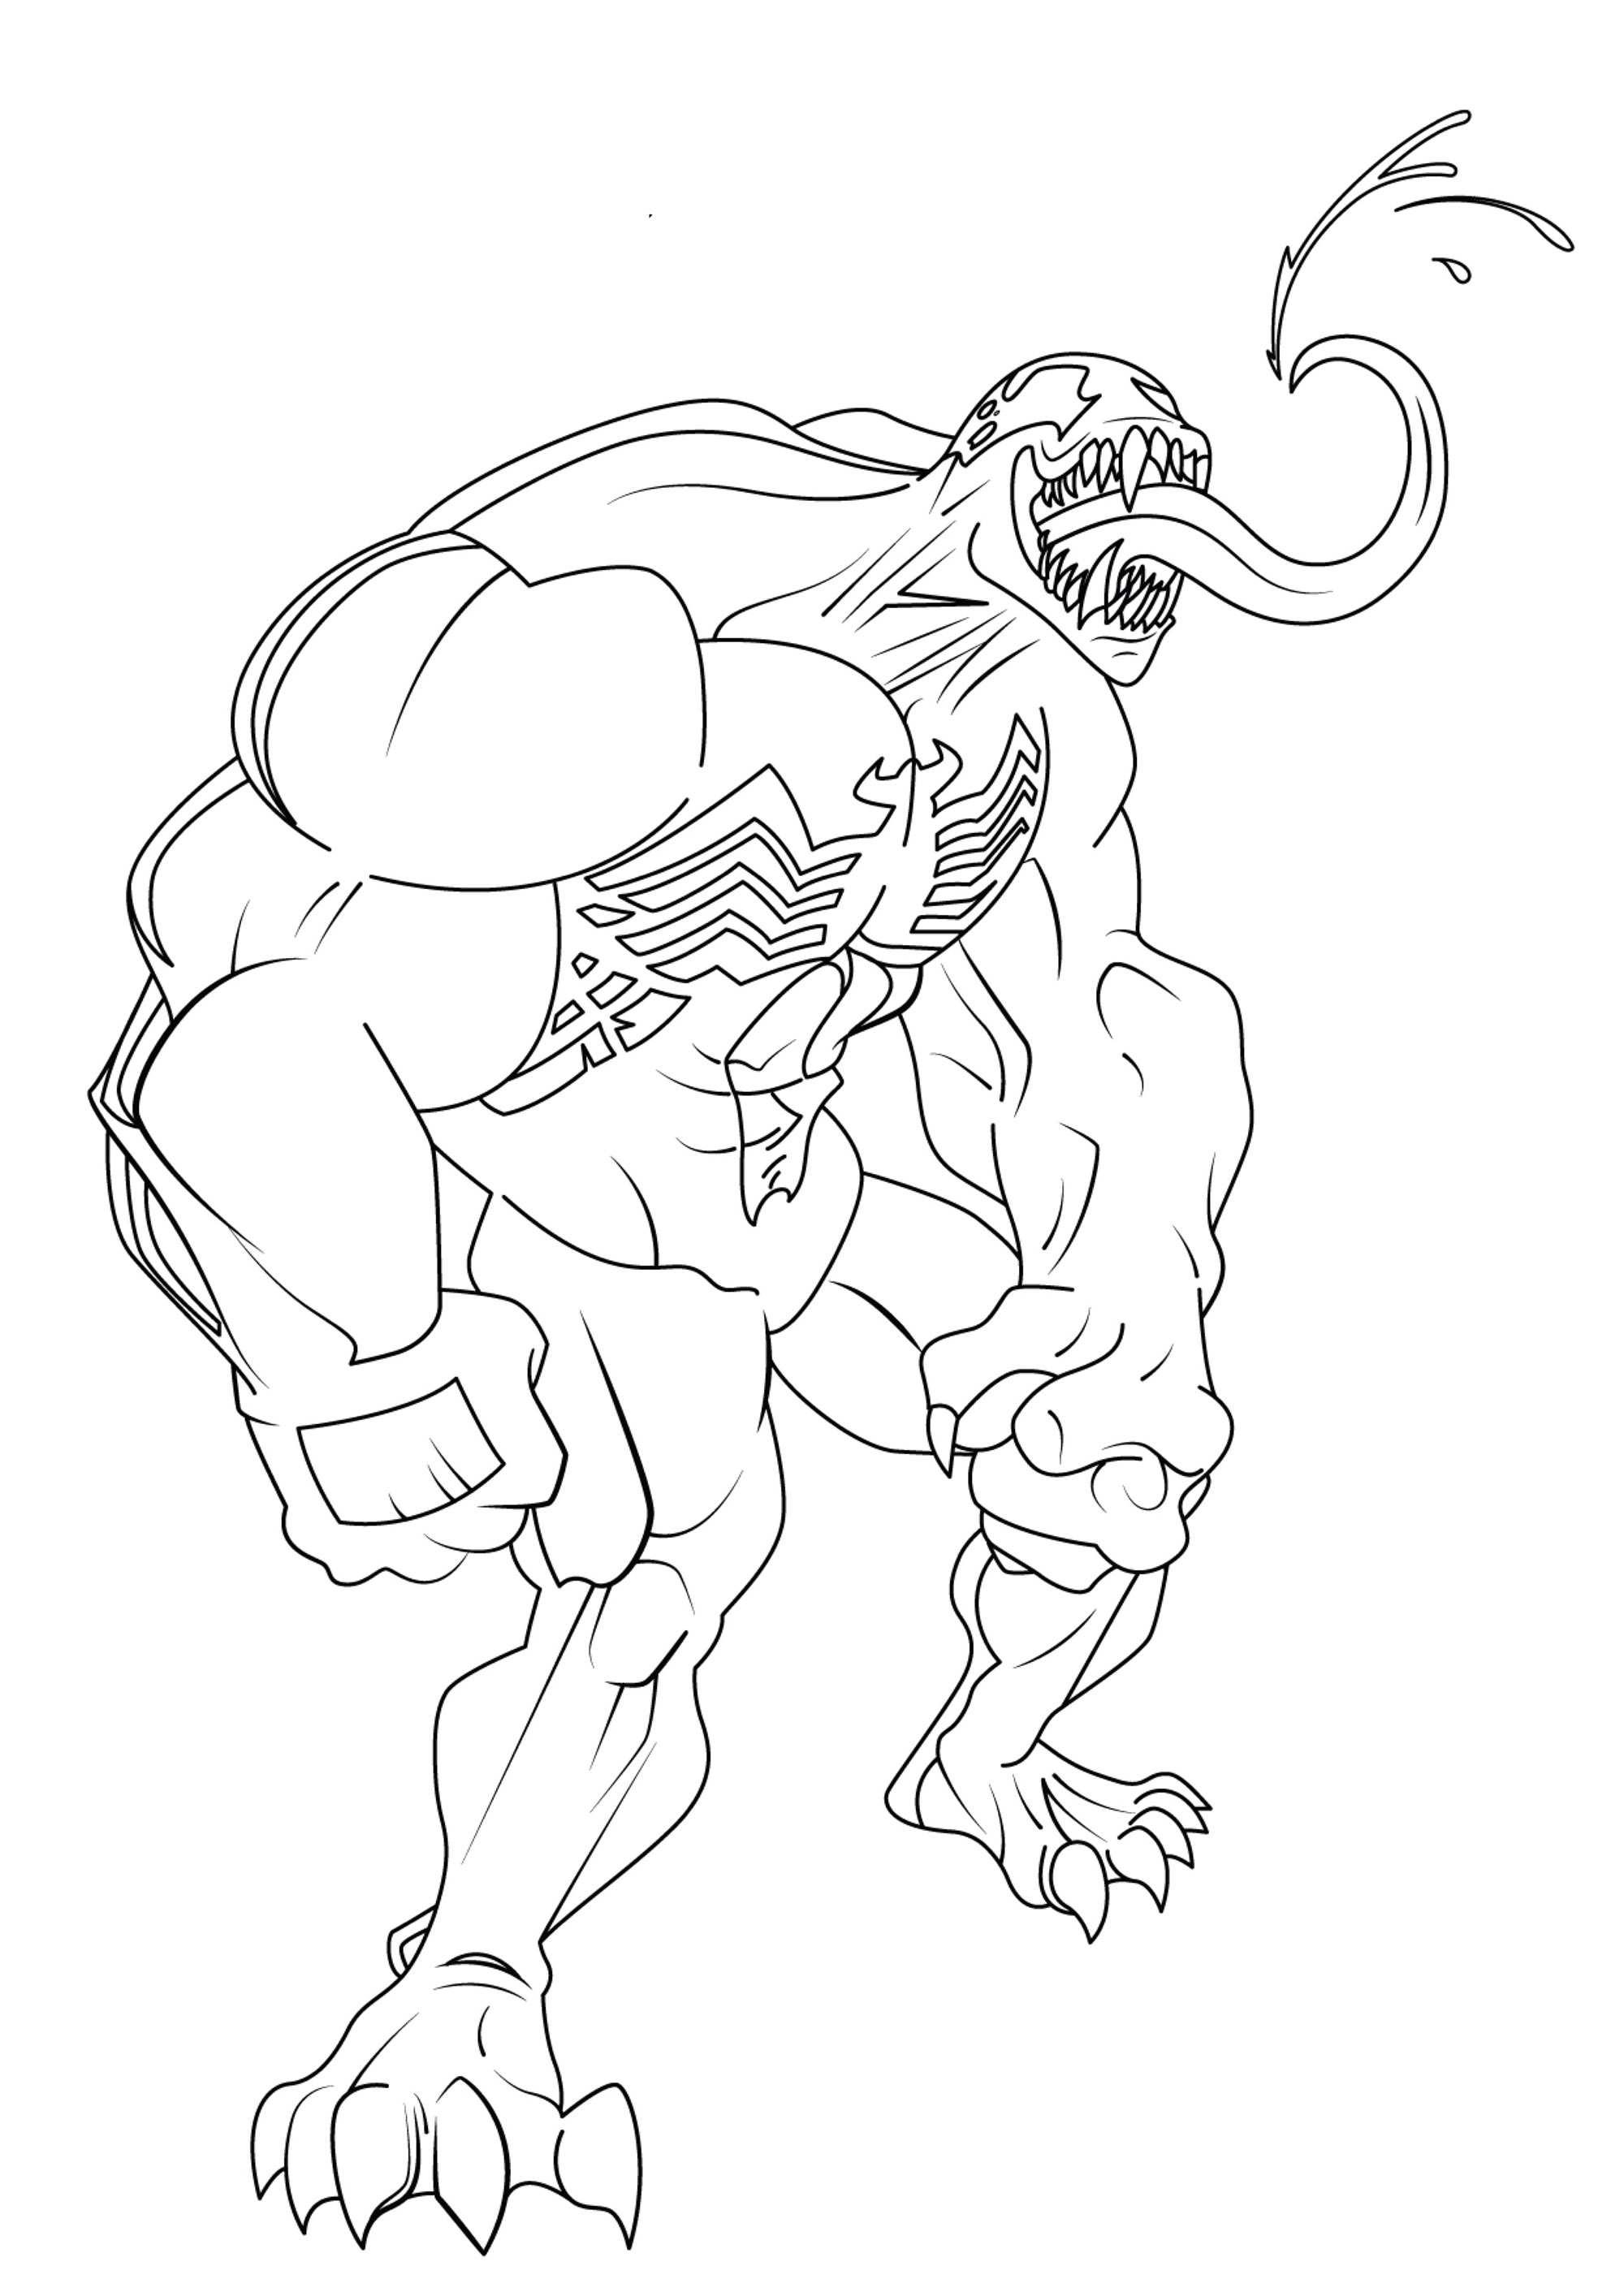 Simple coloring page of Venom. Impressive muscularity